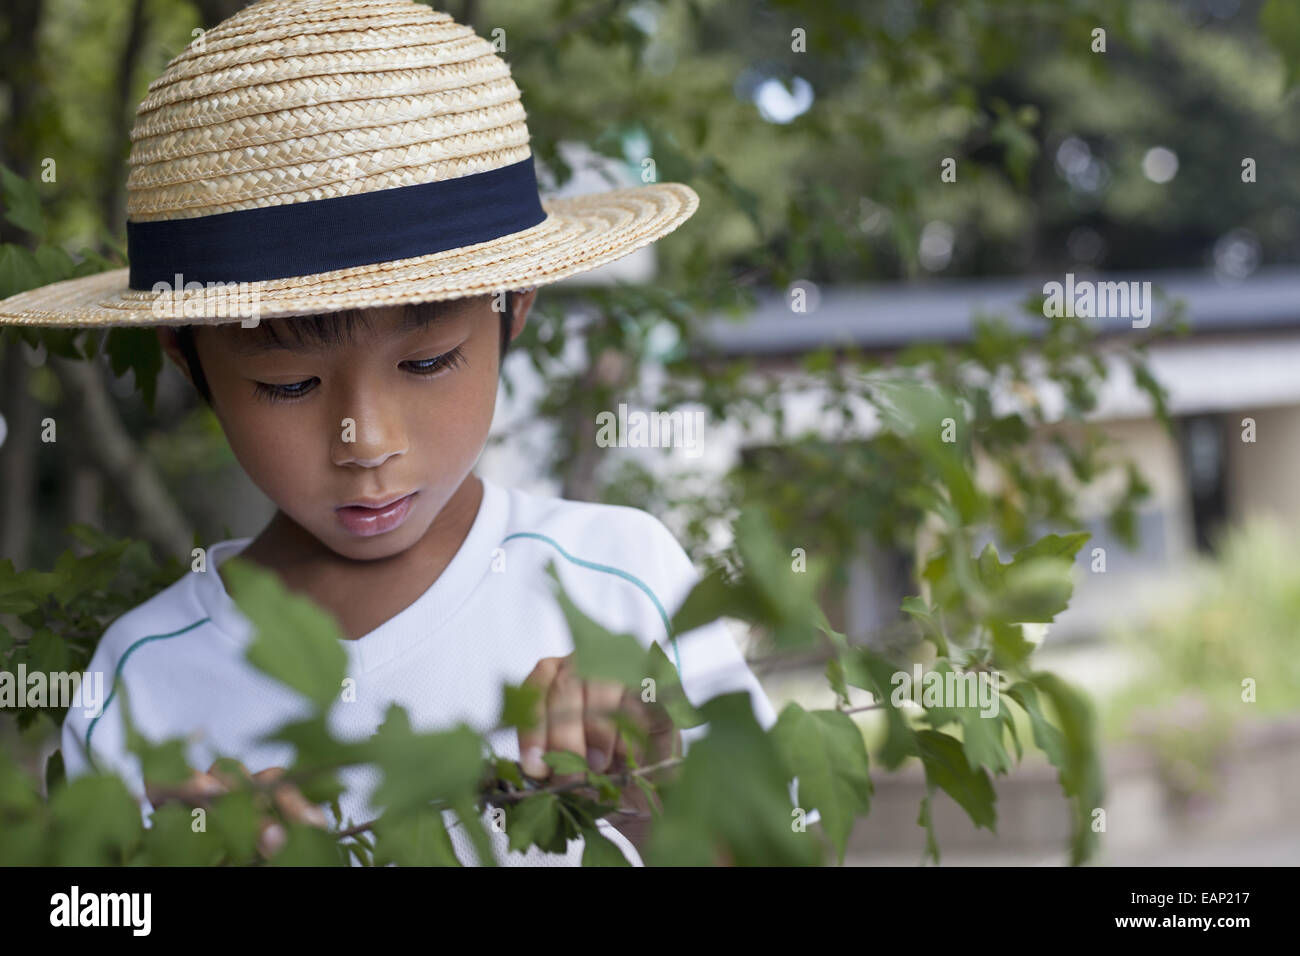 Young boy wearing a straw hat, looking at a tree branch. Stock Photo